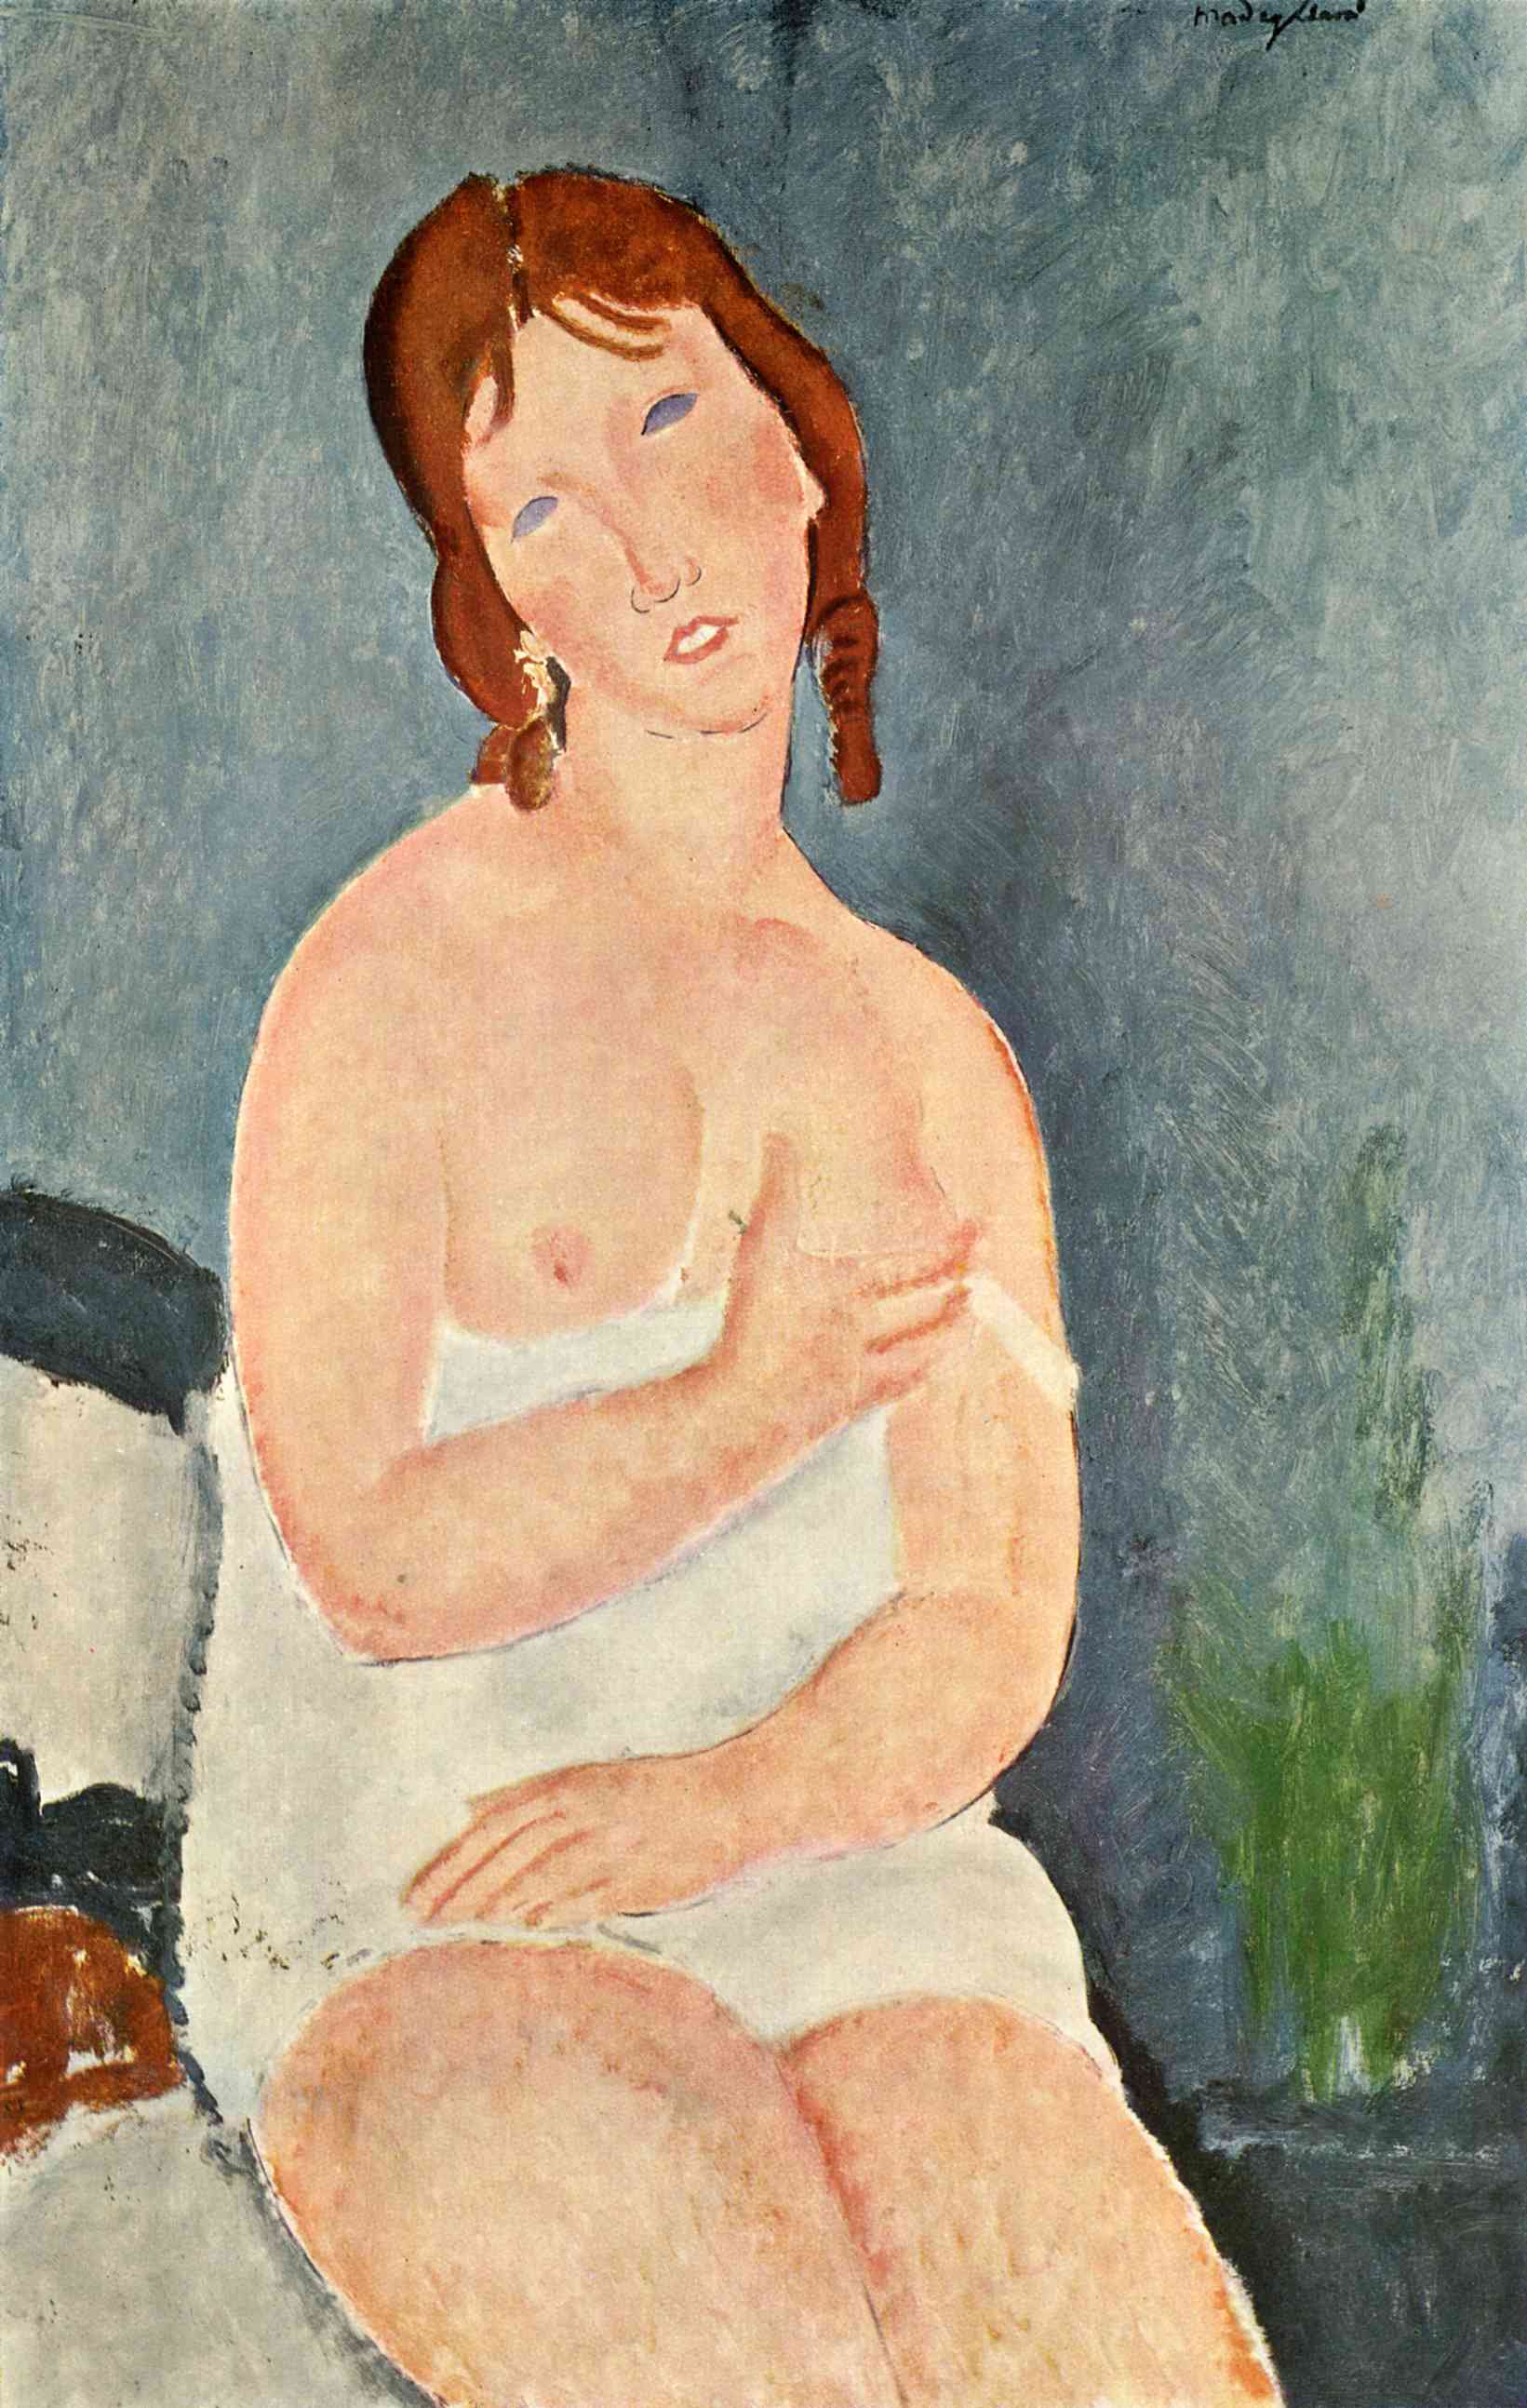 Amedeo Modigliani - Young Woman in a Shirt. The Little Milkmaid 1919